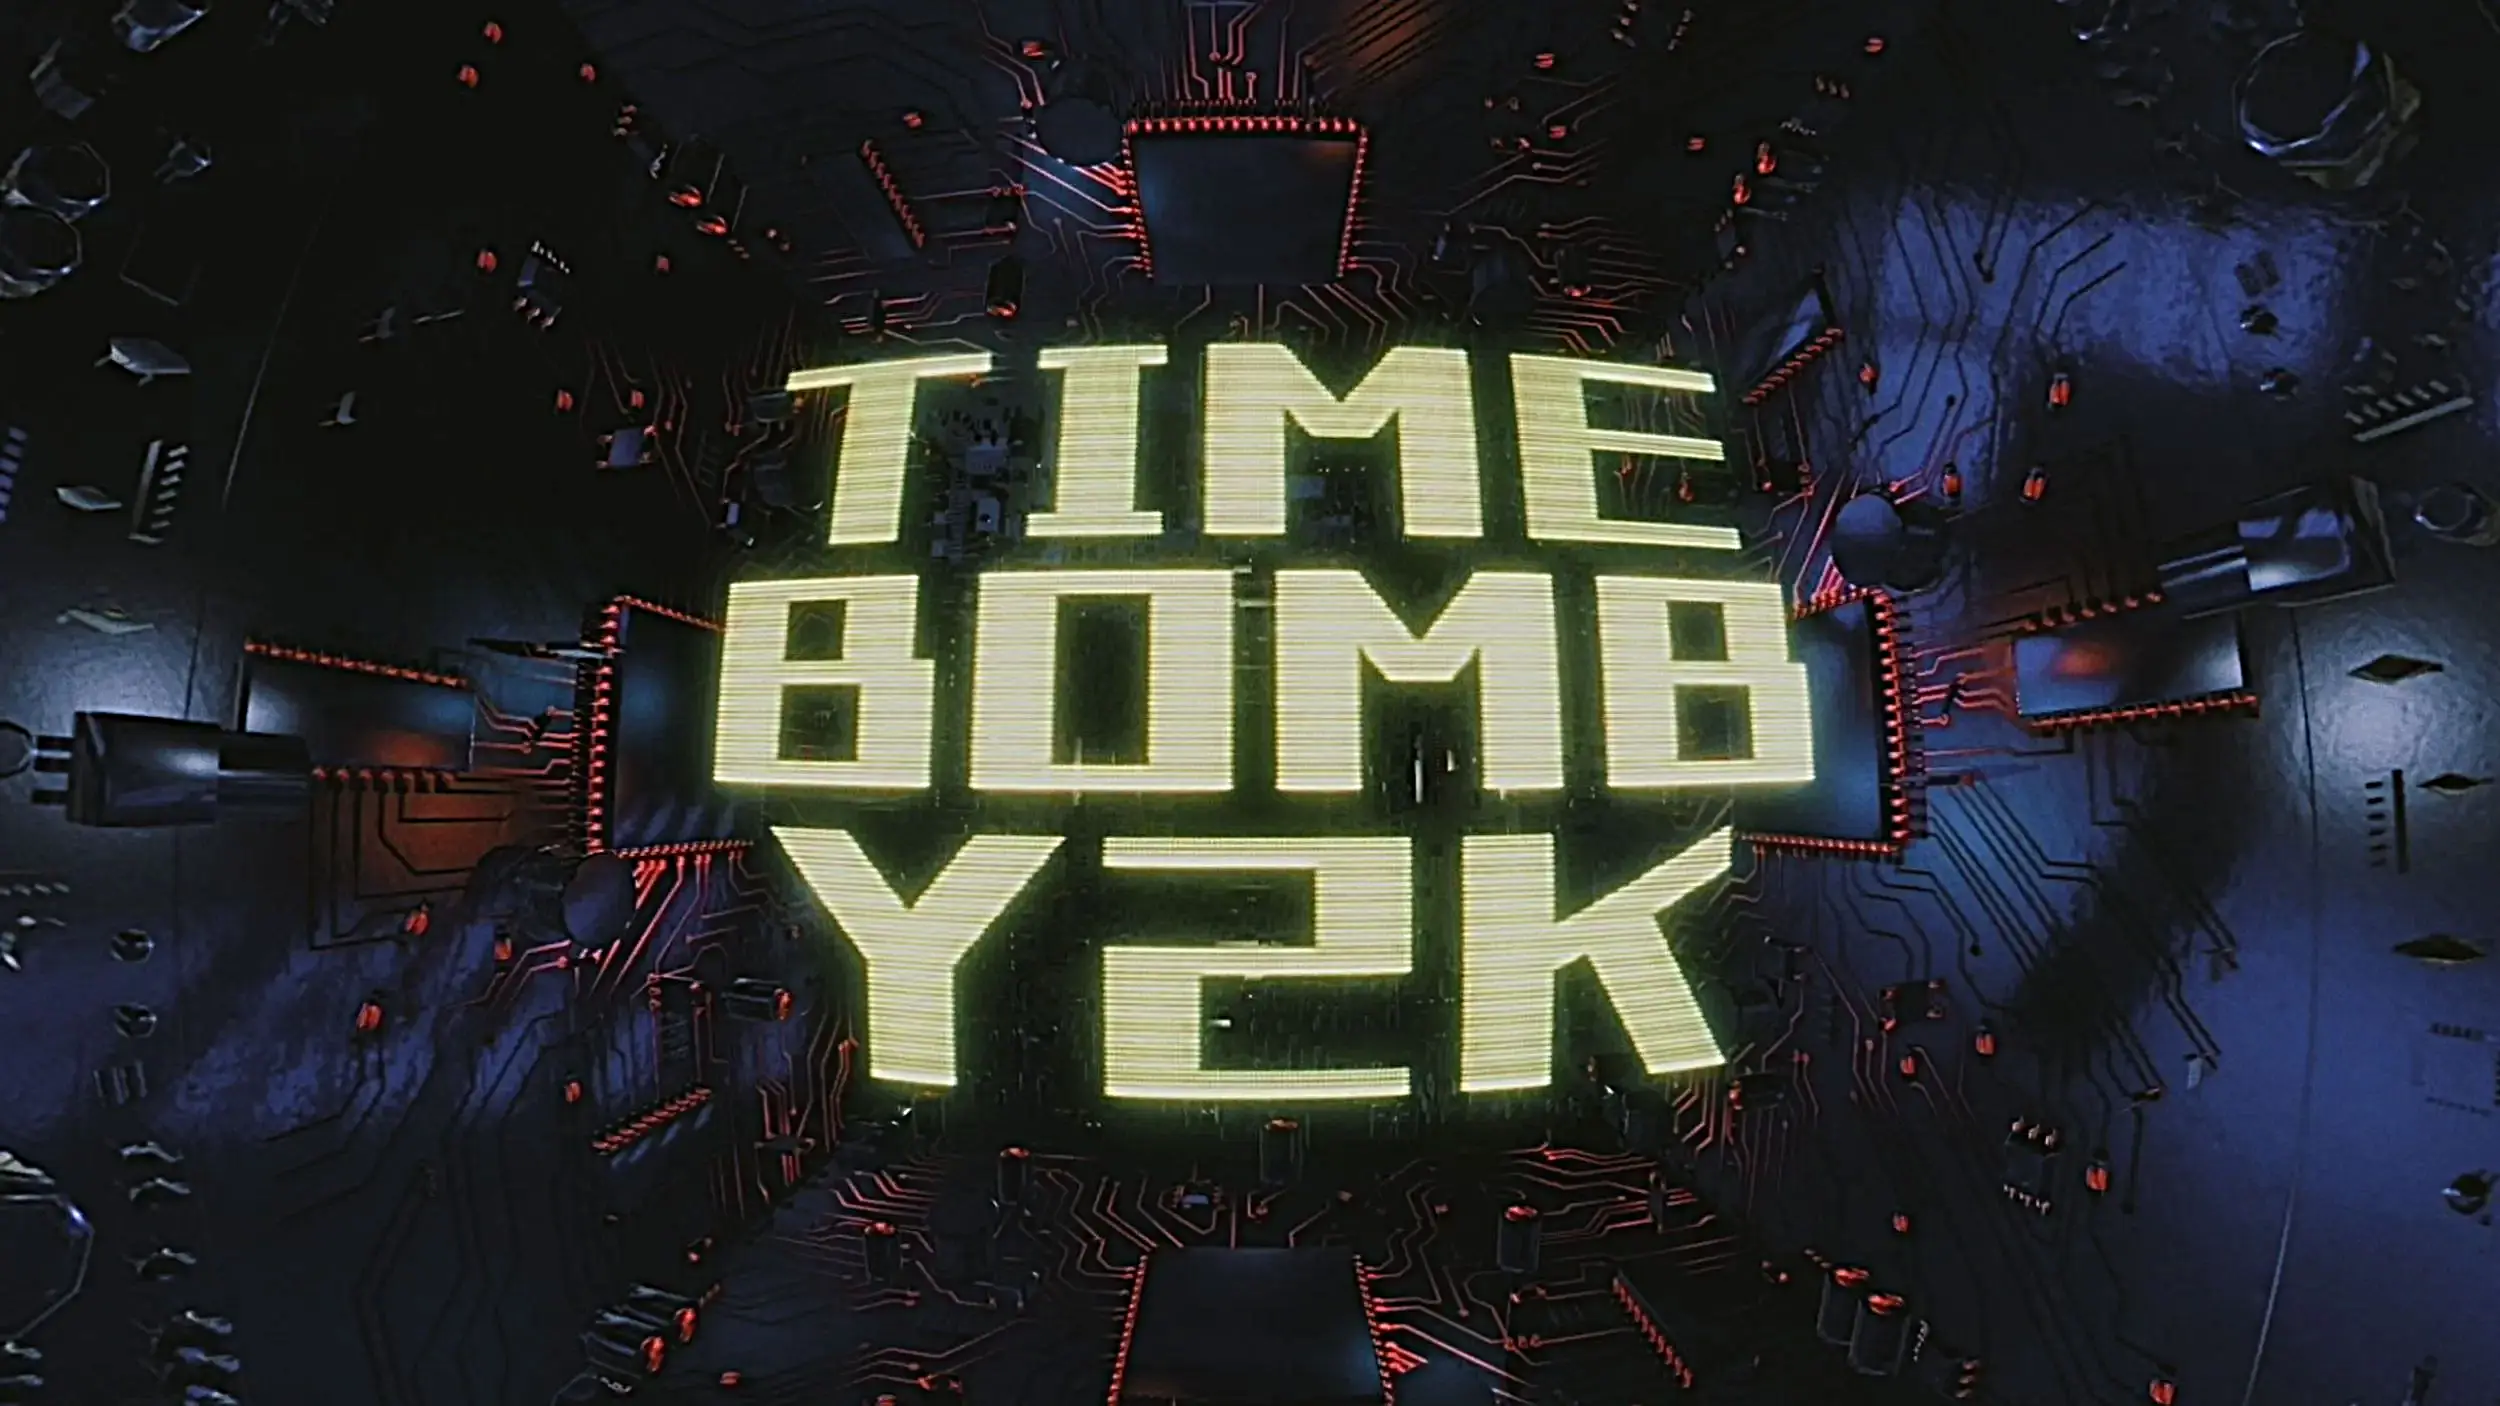 Time Bomb Y2K Ending Explained: A Closer Look at "Time Bomb Y2K" and its Timeless Message